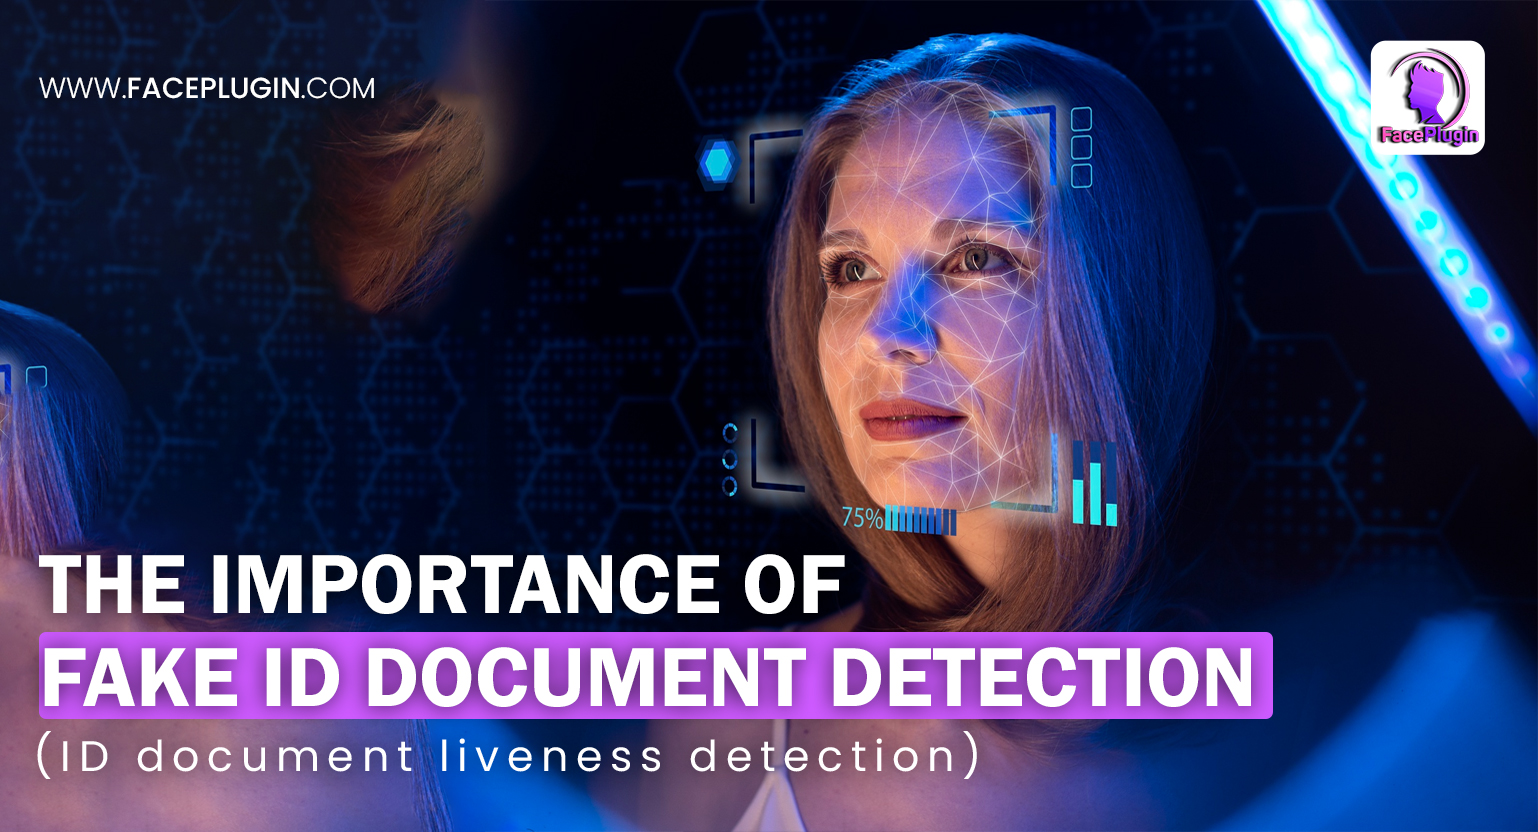 Detecting Deception—The Importance of Fake ID Document Detection (ID document liveness detection)